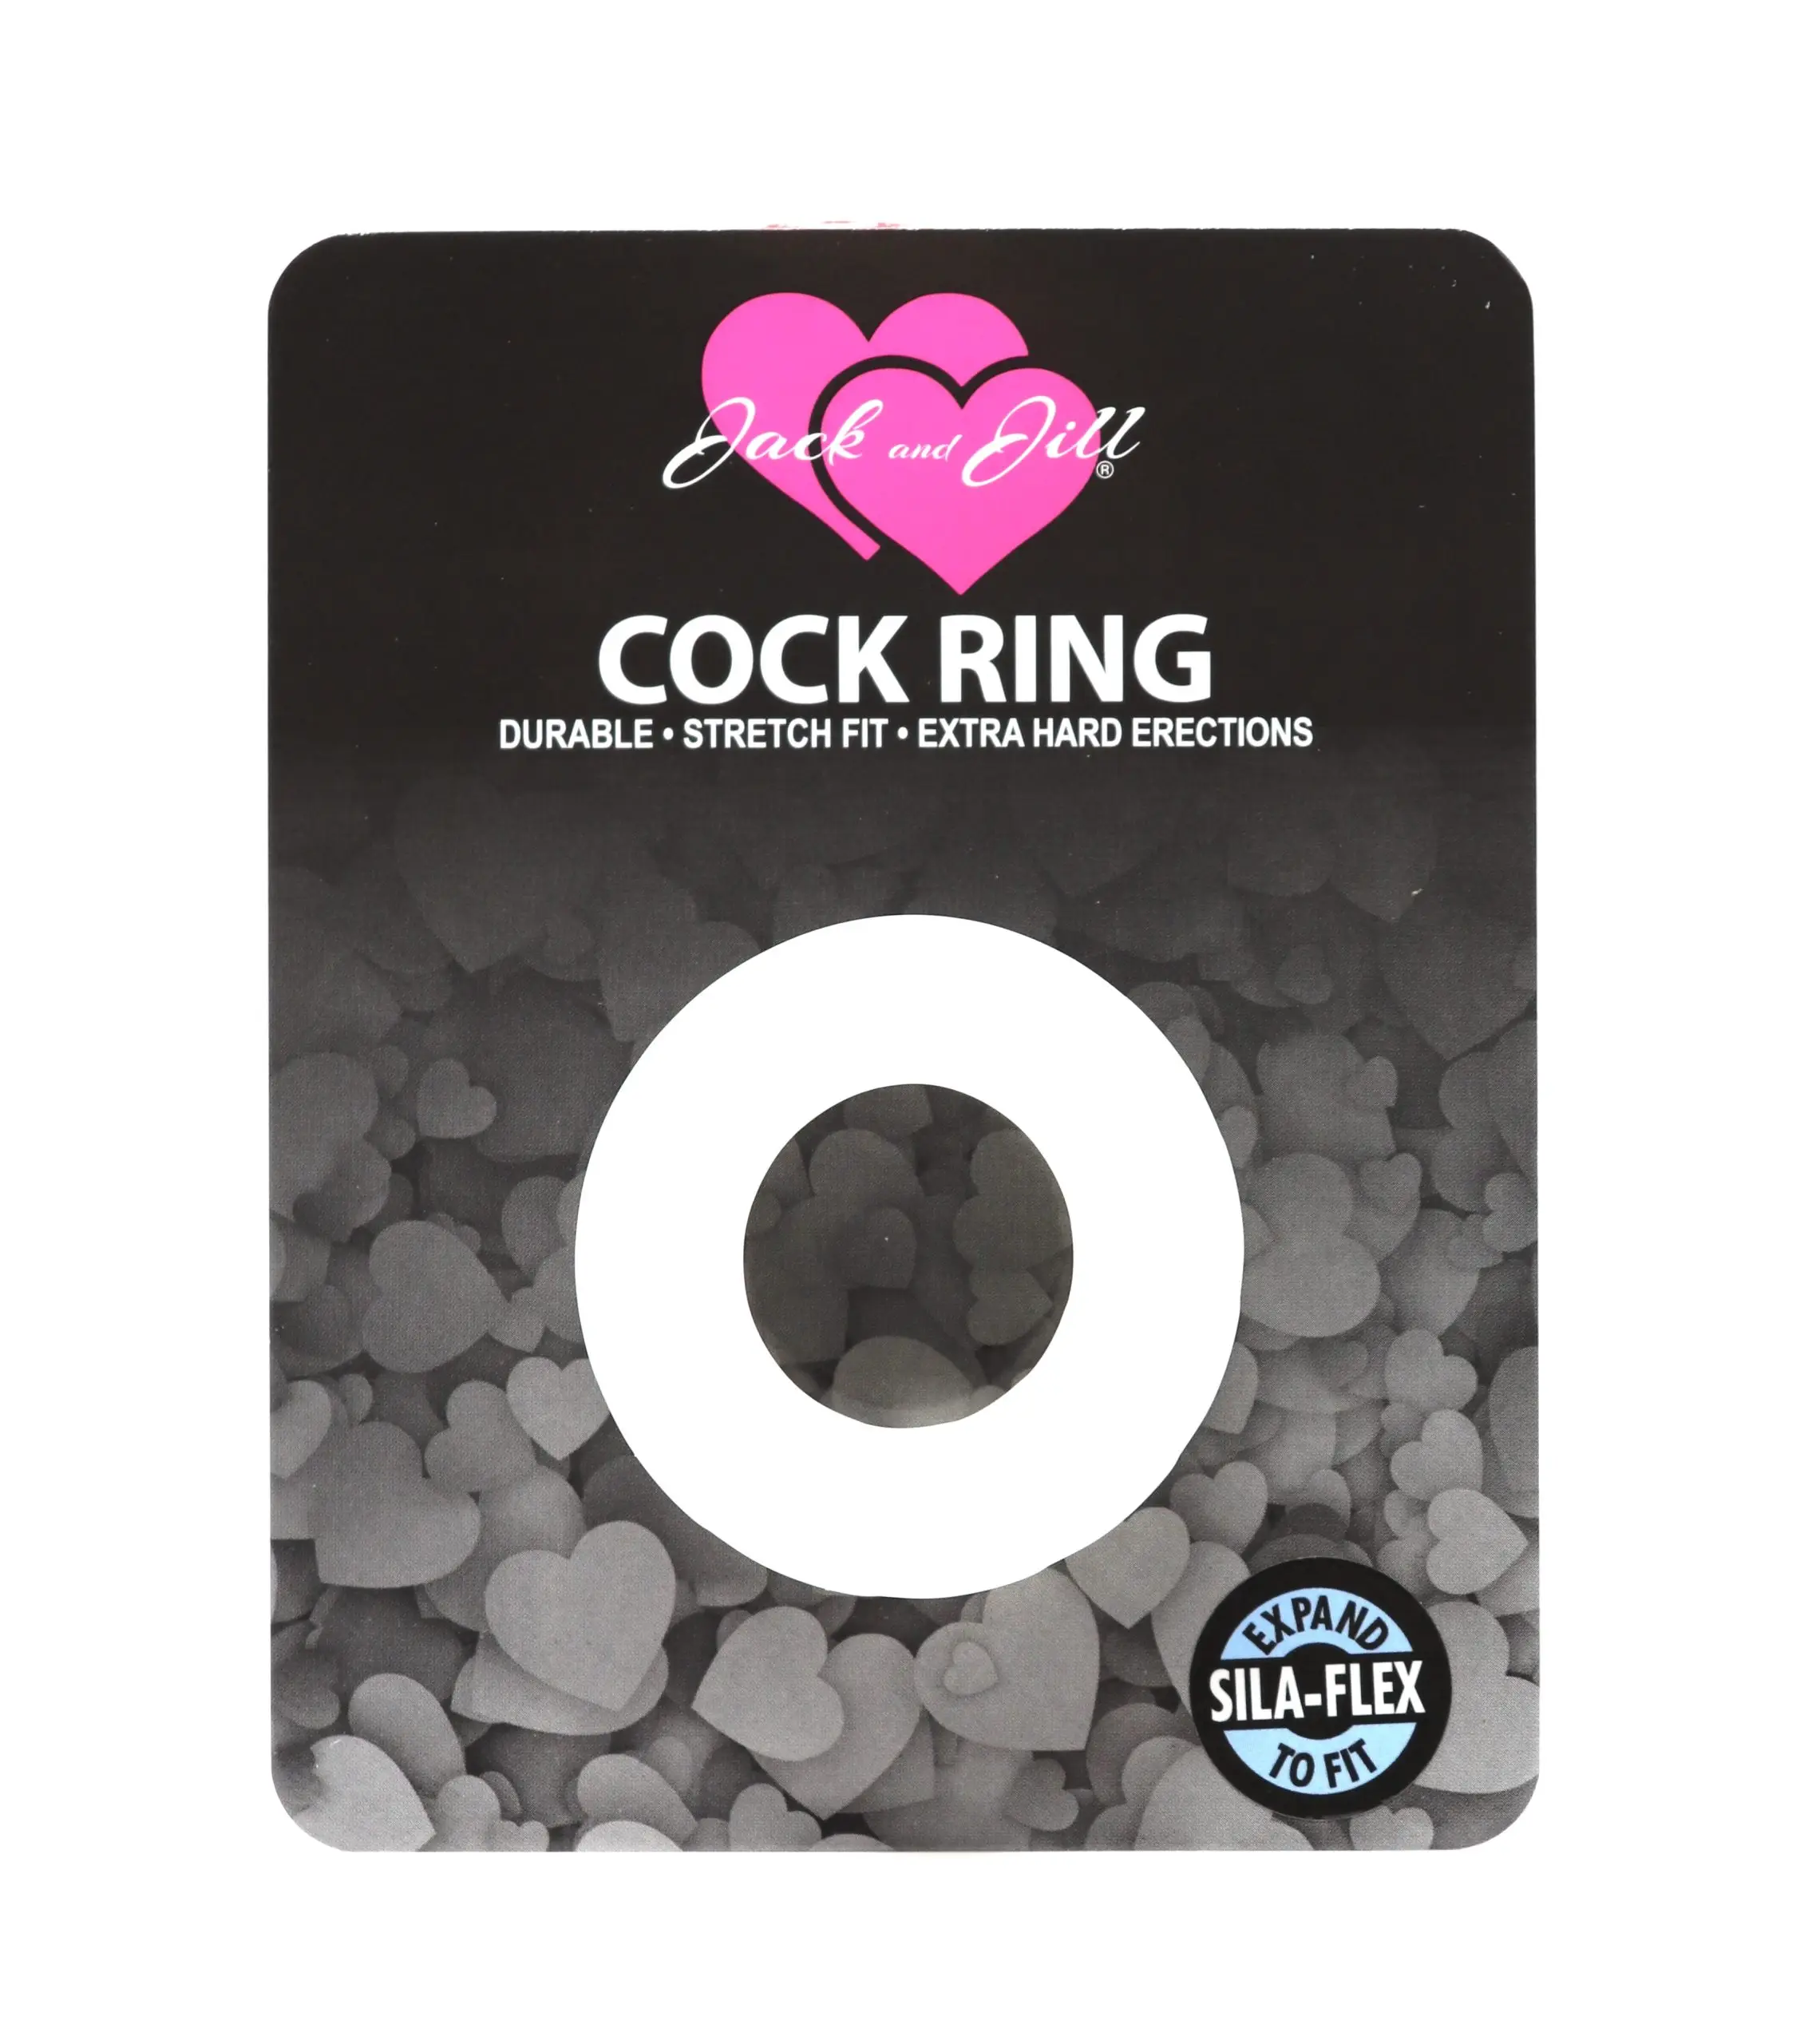 Jack and Jill Silicone Fat Tire Translucent cock ring